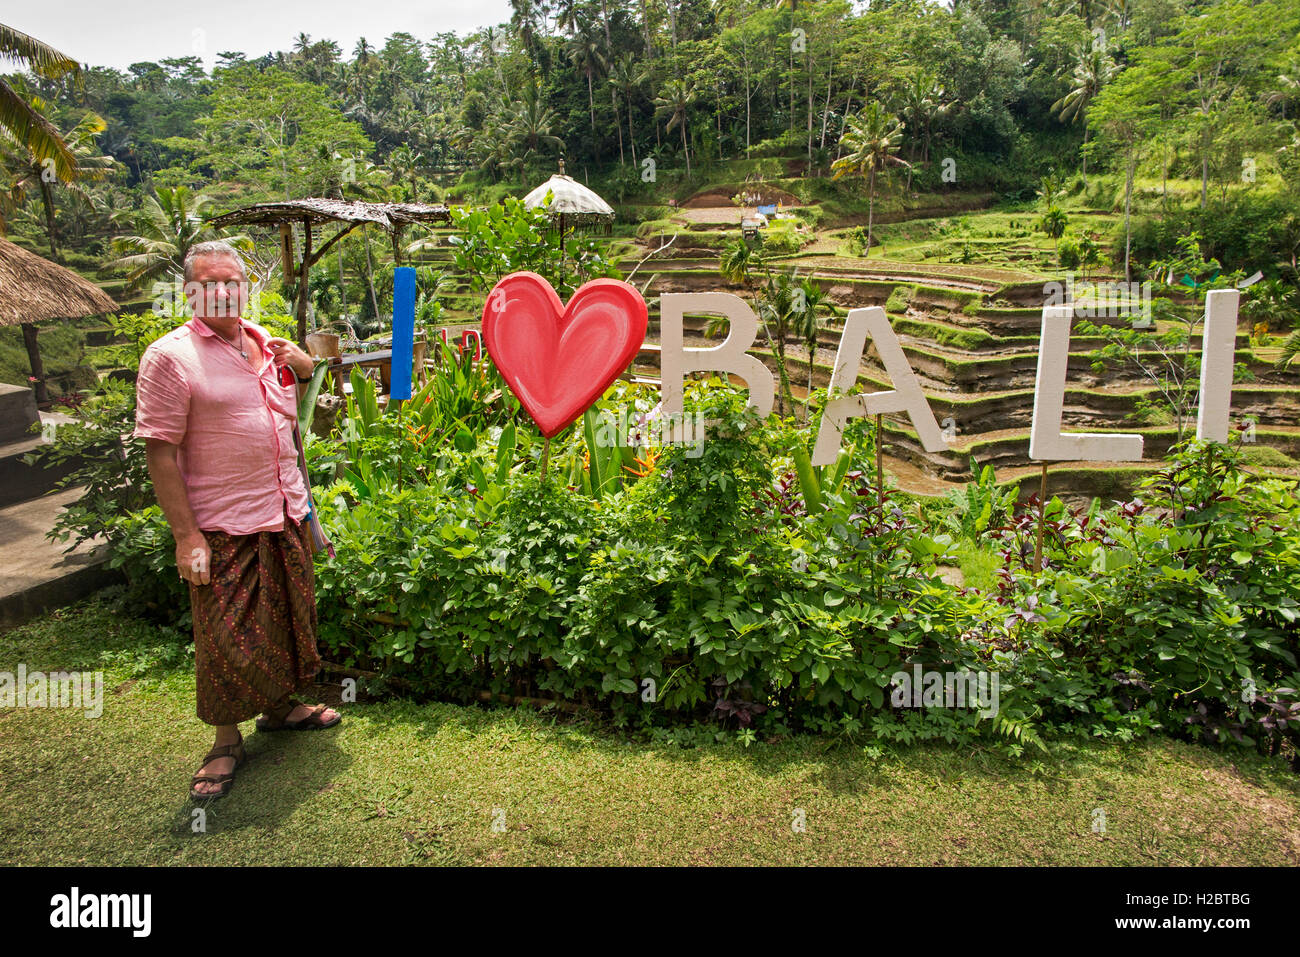 Indonesia, Bali, Tegallang, tourist wearing sarong at I love (heart) Bali sign in cafe garden Stock Photo